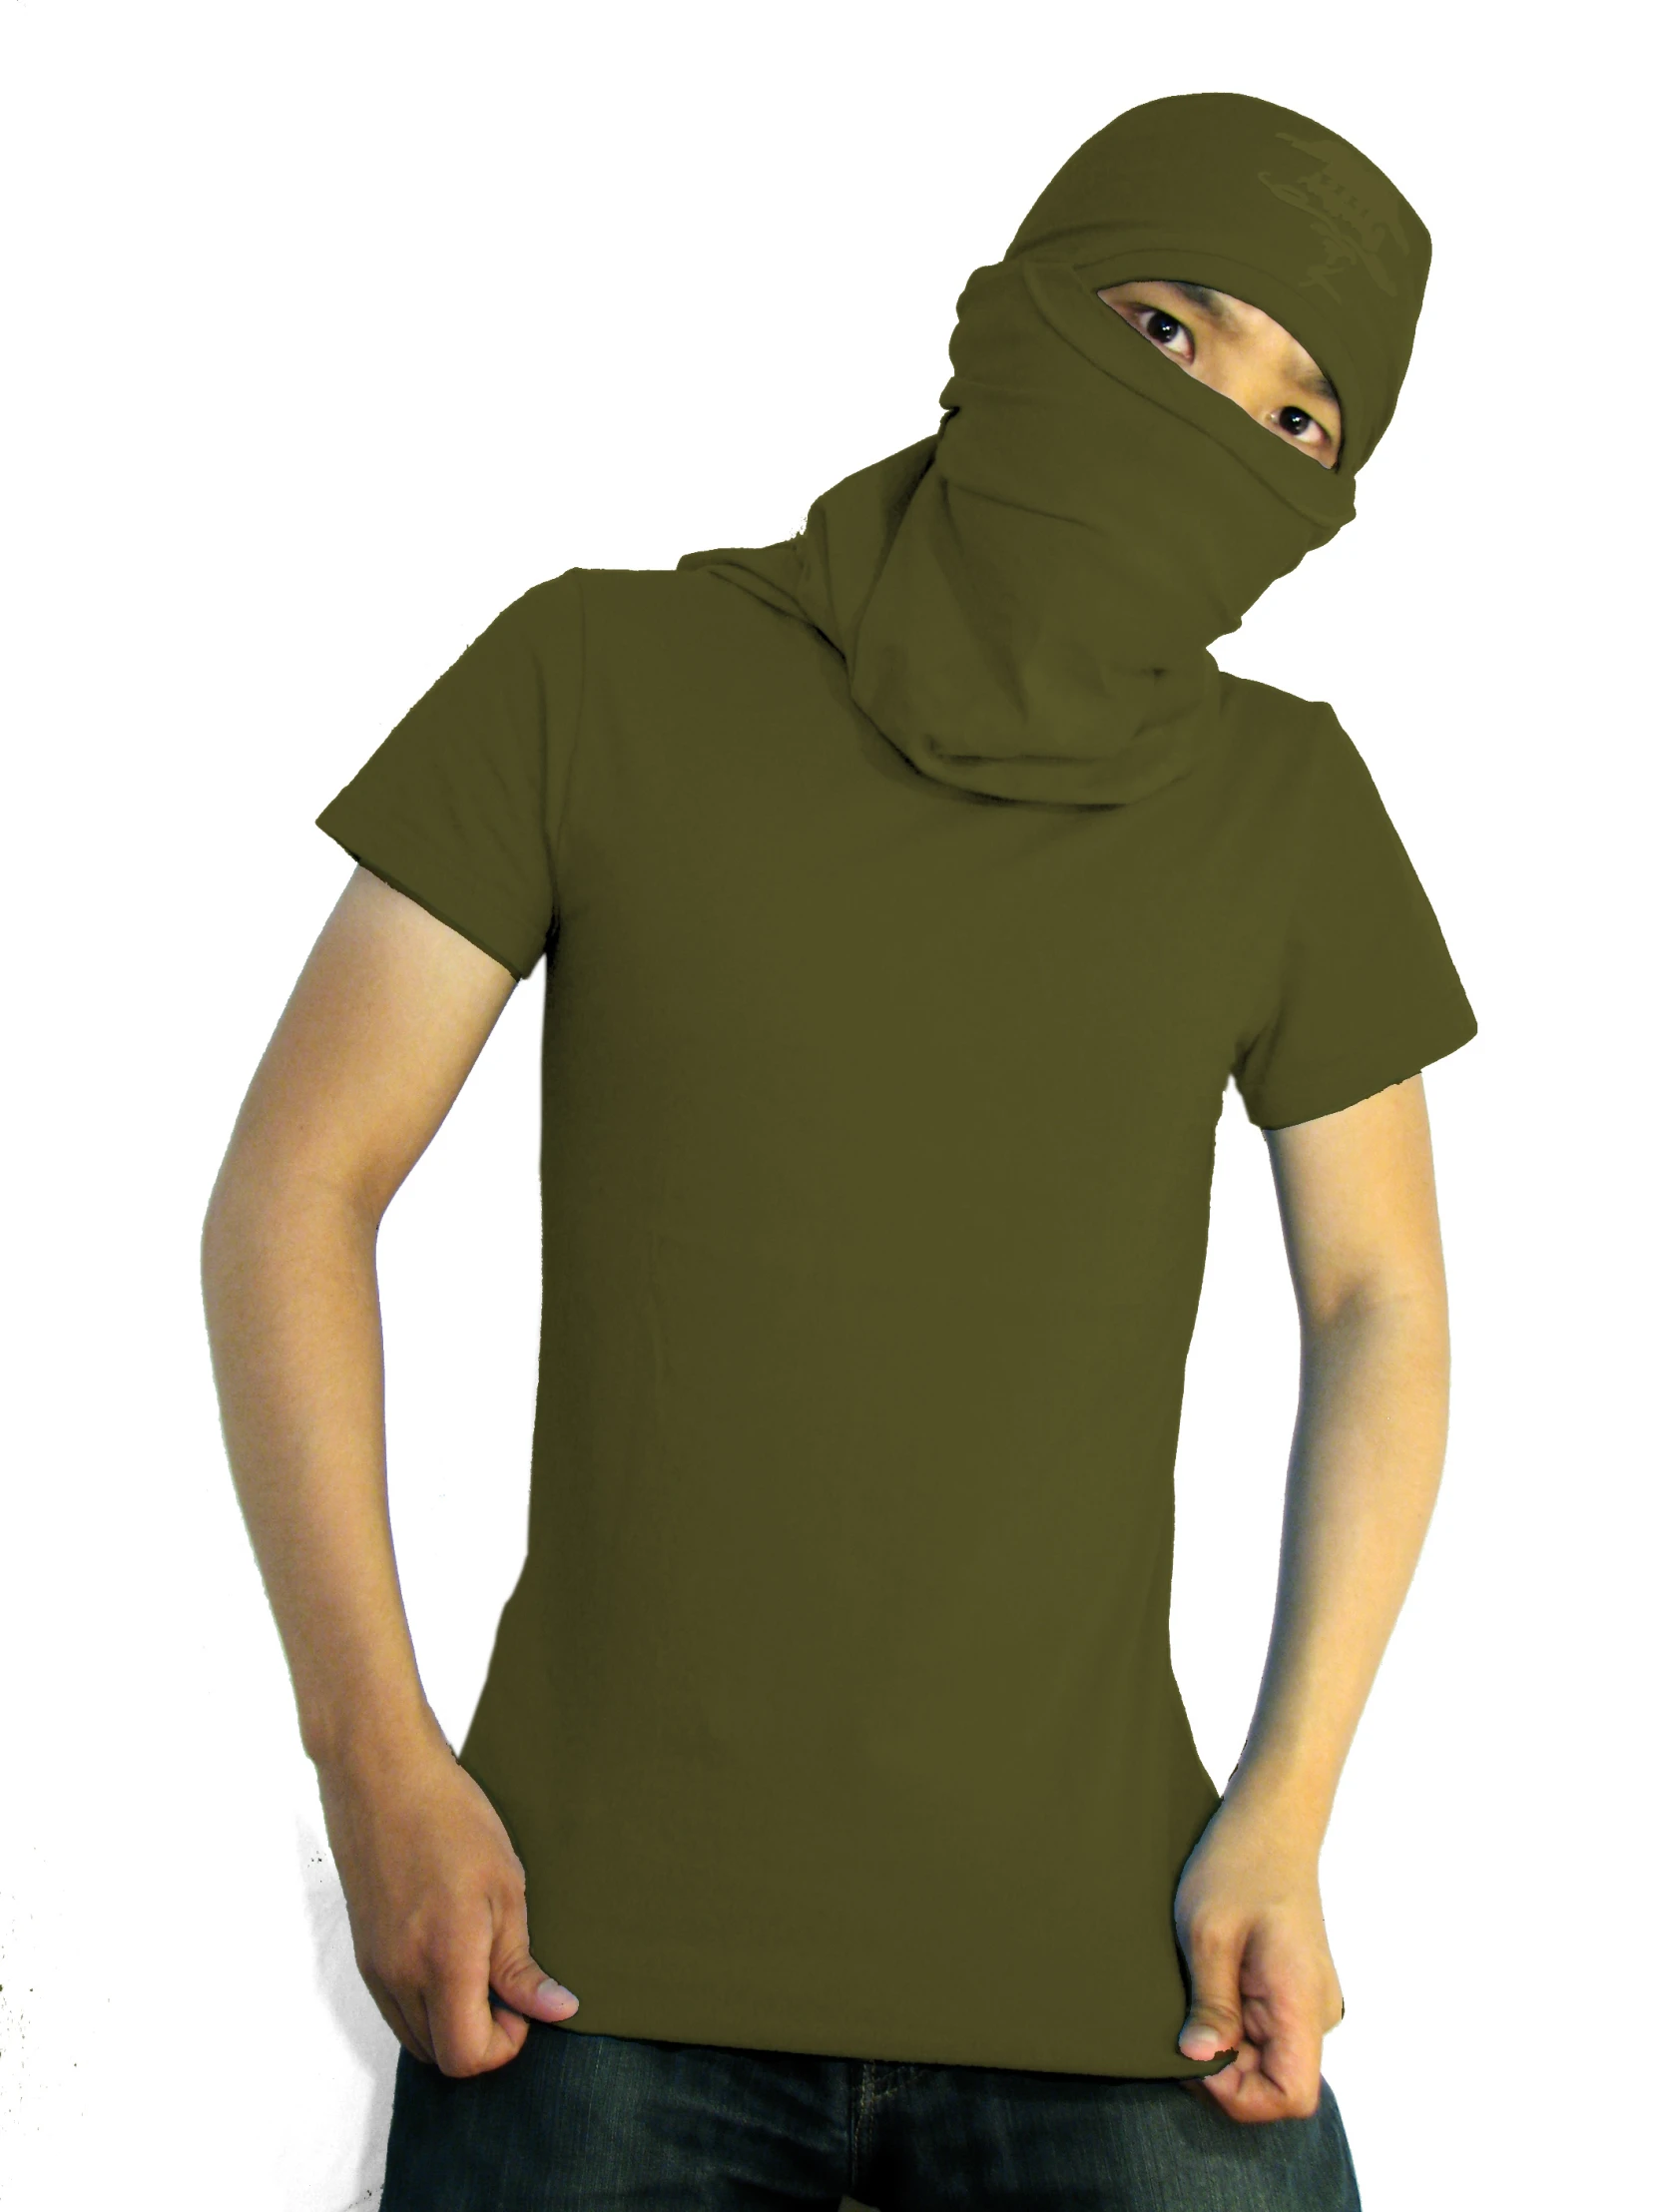 man with green hoodie posing for a picture